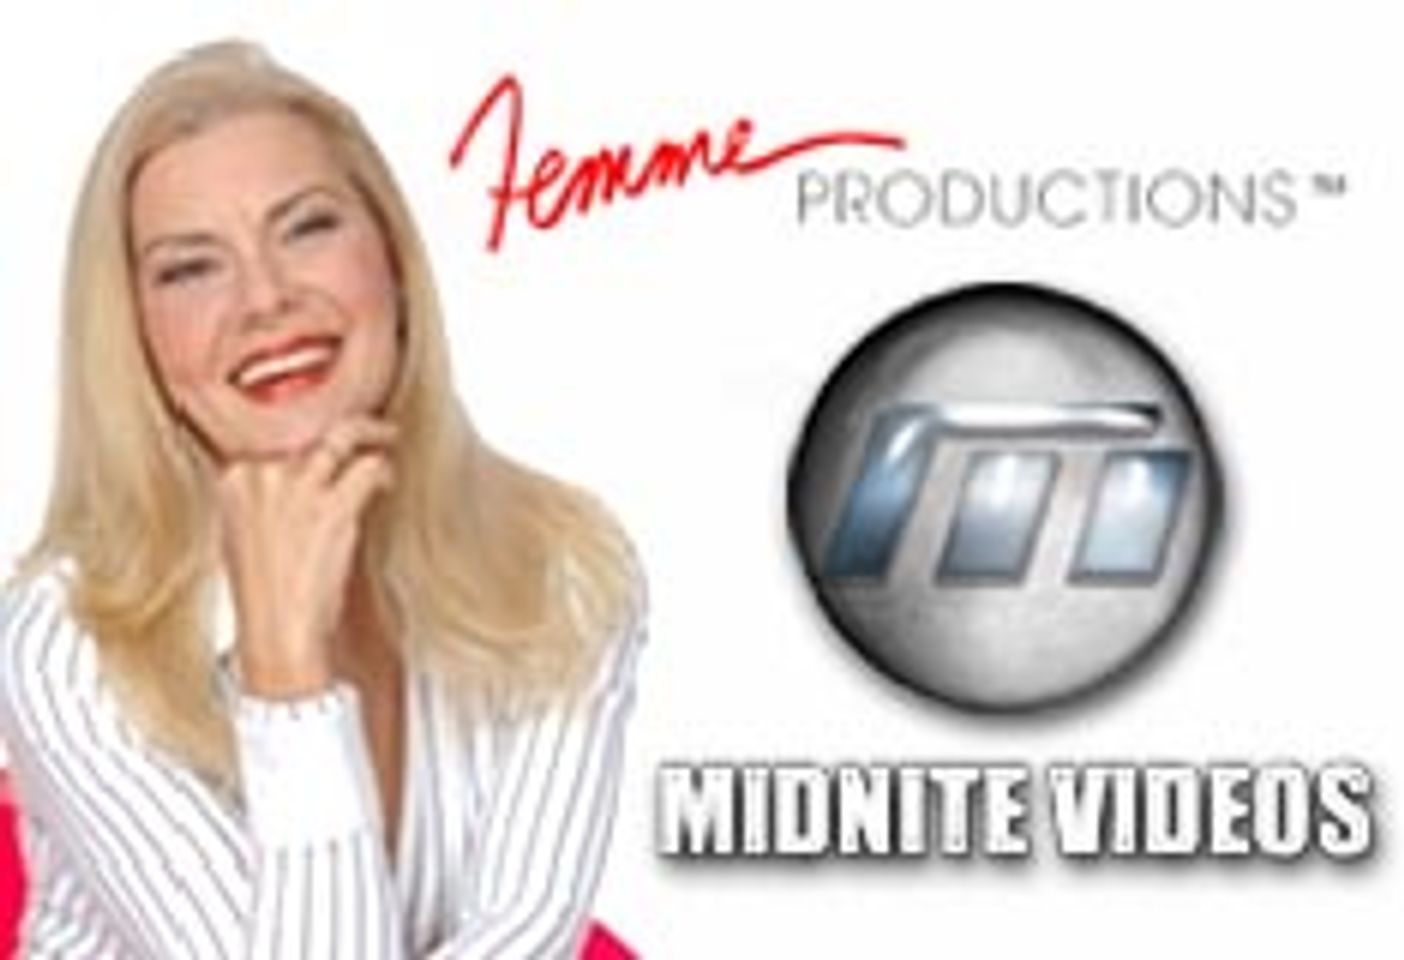 Femme Productions Inks Deal With Midnite Videos